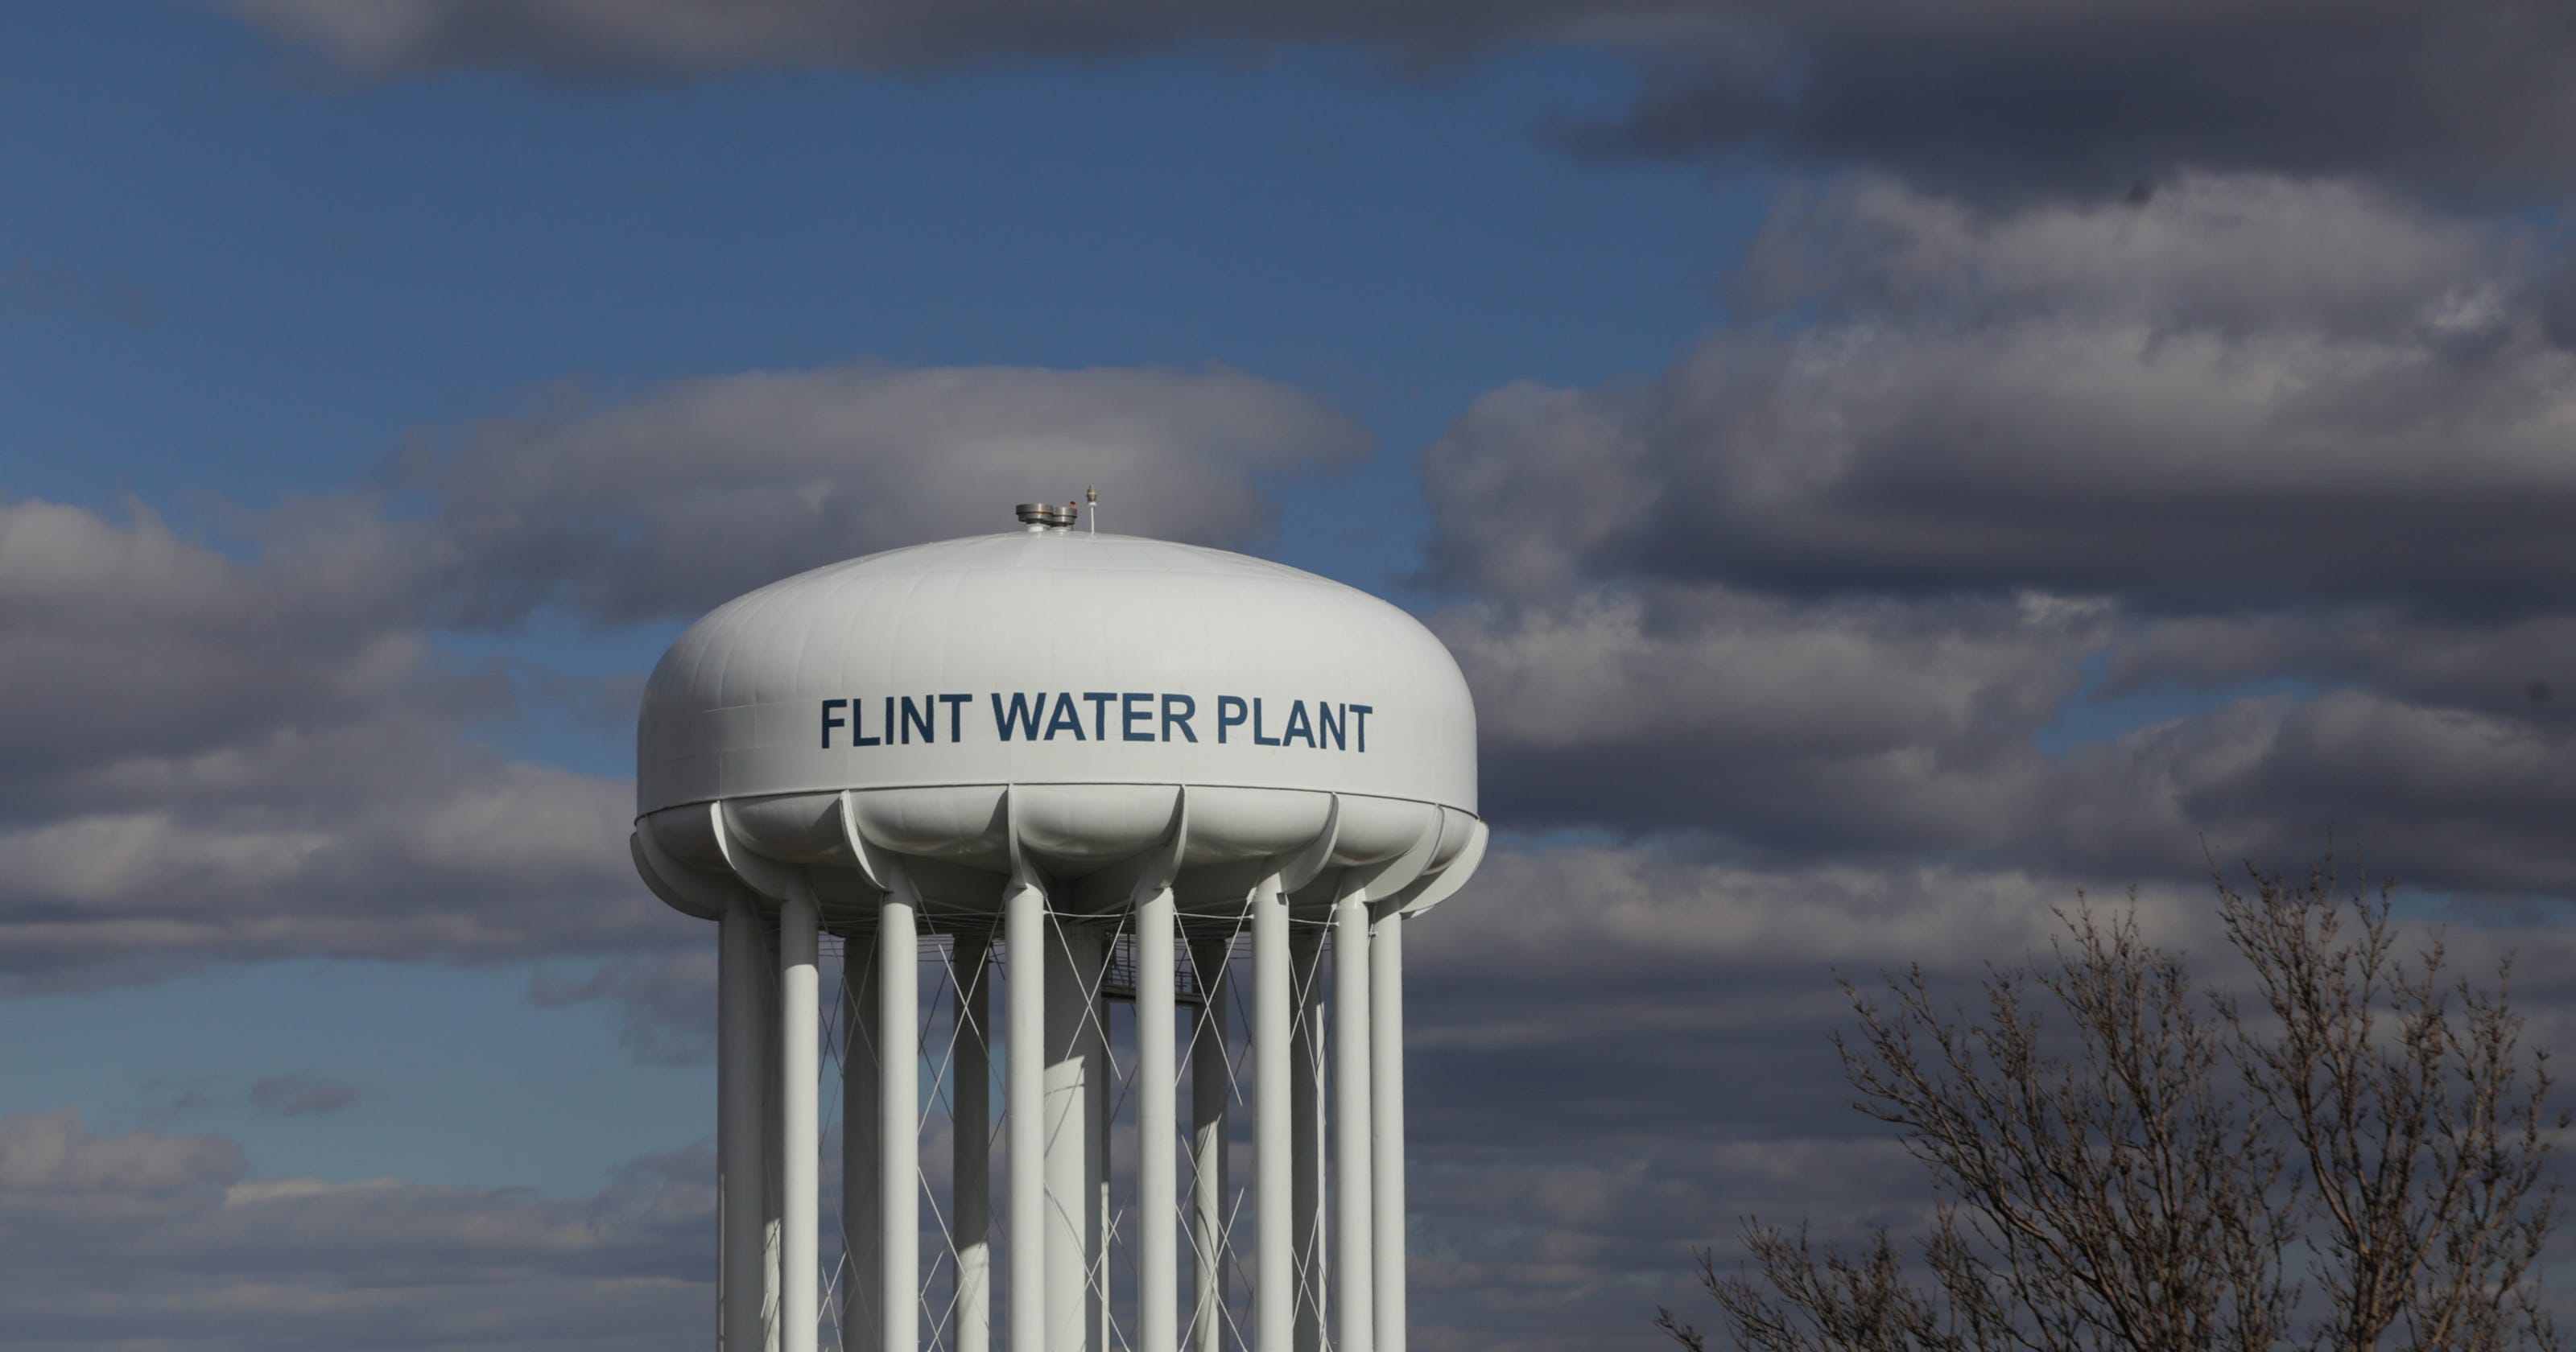 Lawsuit alleges Flint water crisis hit jail inmates especially hard